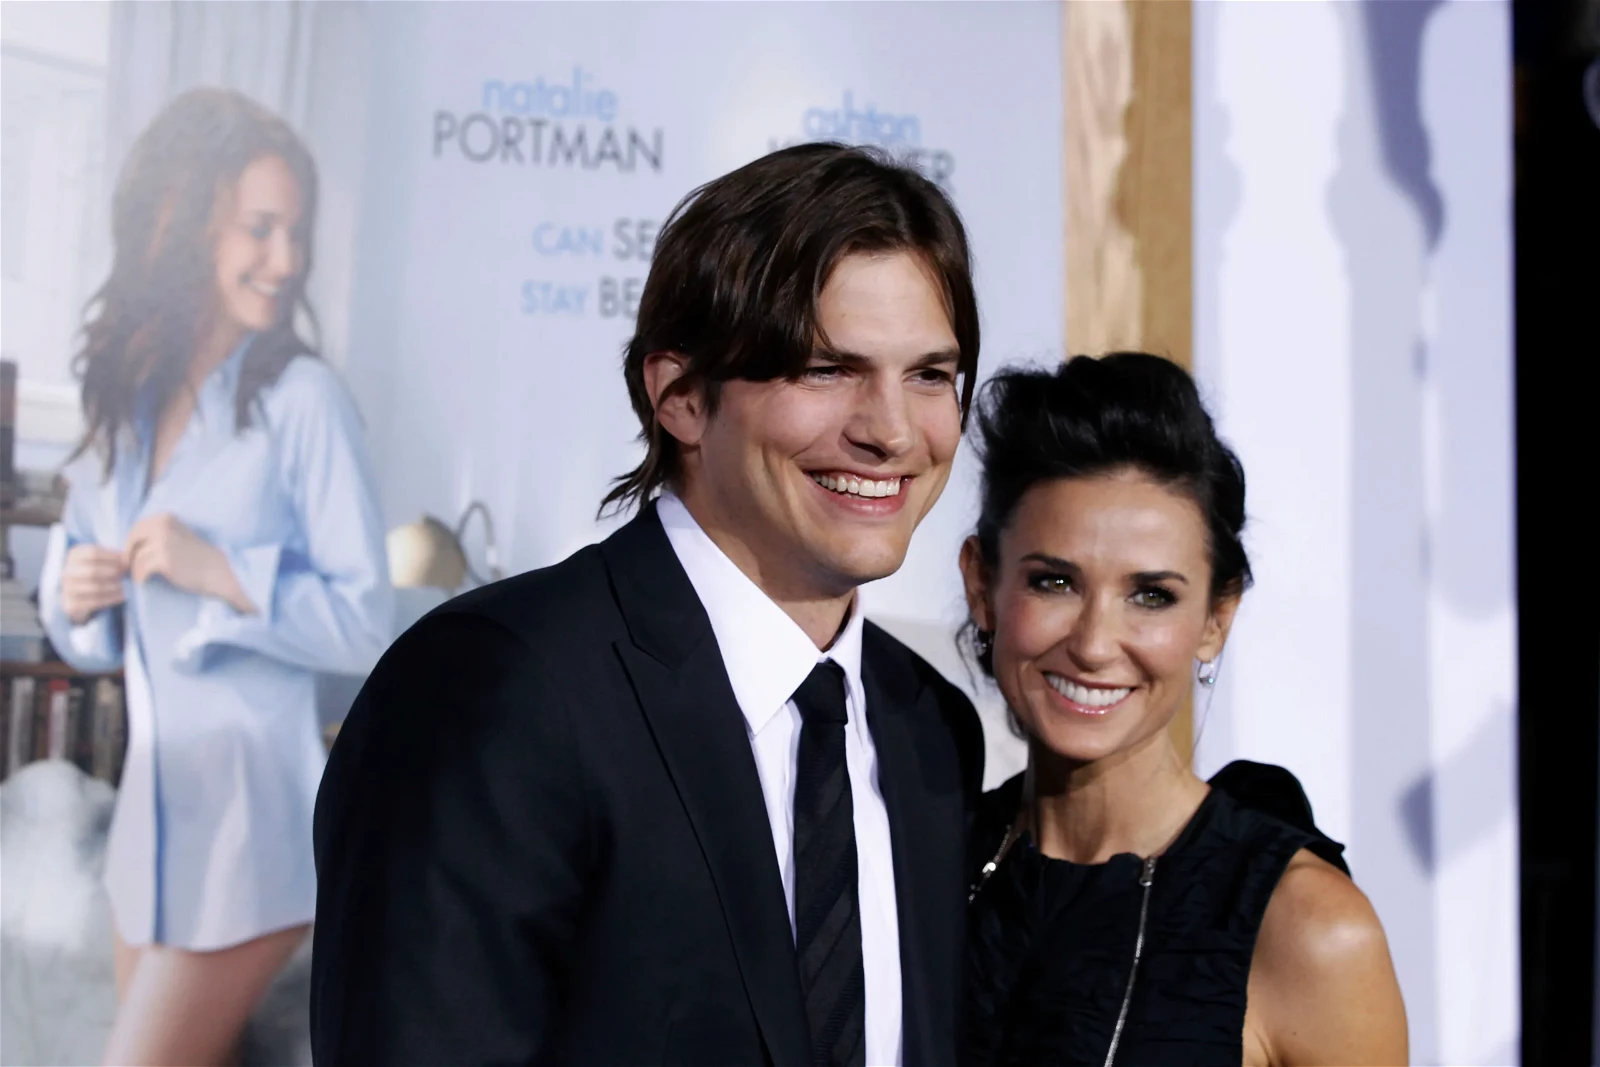 Ashton Kutcher and Demi Moore at the premiere for No Strings Attached